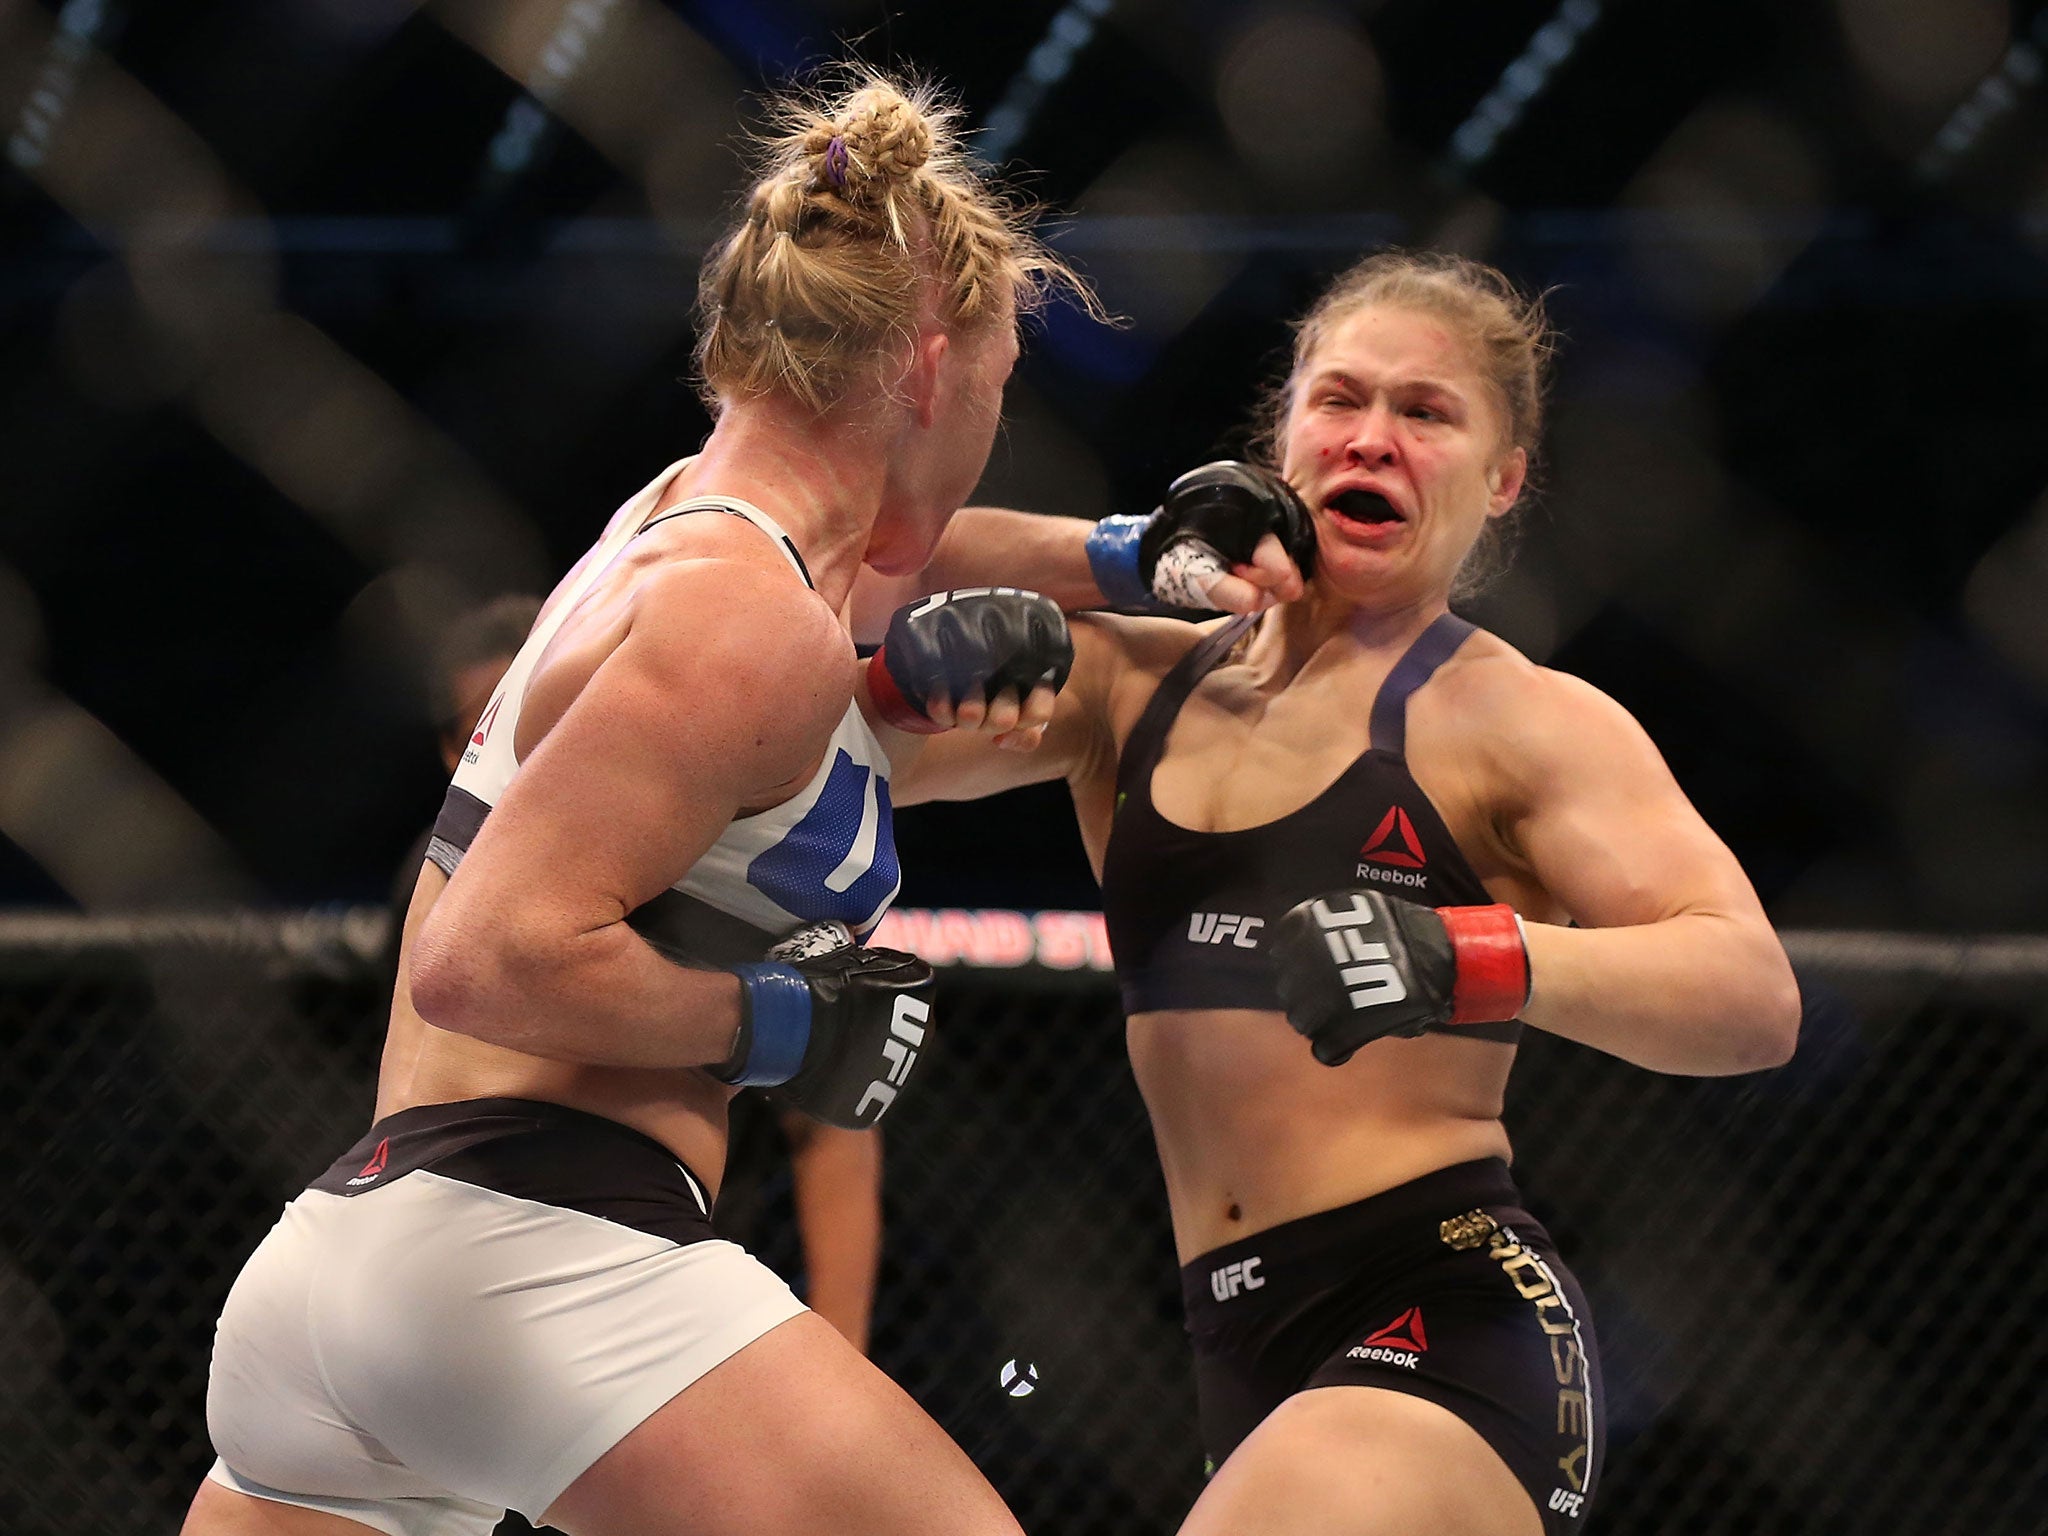 Holly Holm catches Ronda Rousey with a jab